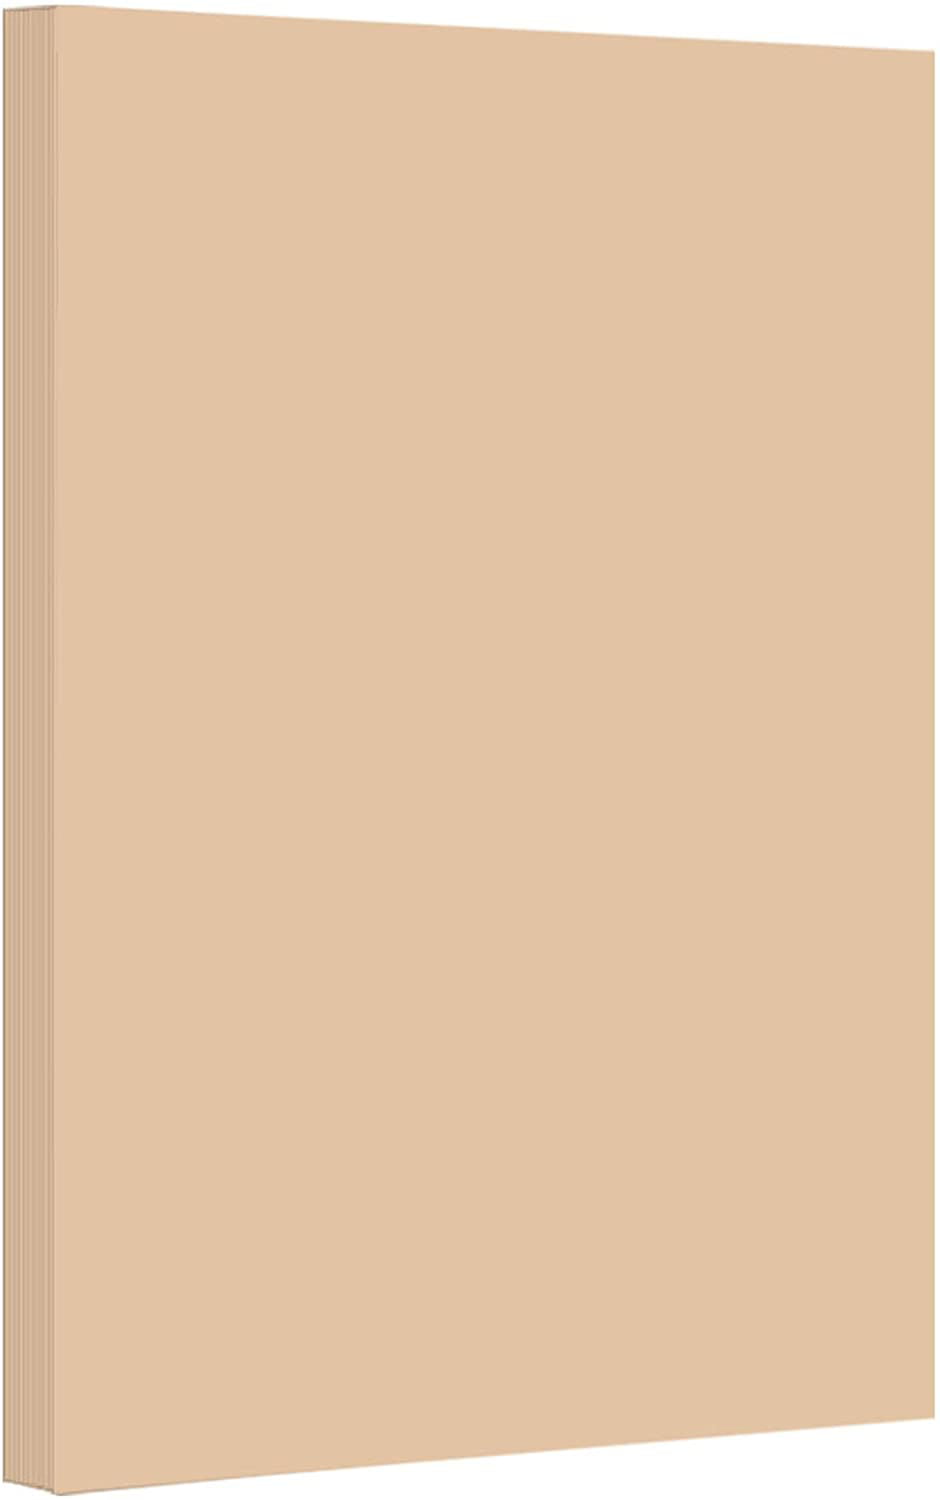 Cream Pastel Color Card Stock, 67Lb Cover Cardstock, 8.5 x 14 Inches